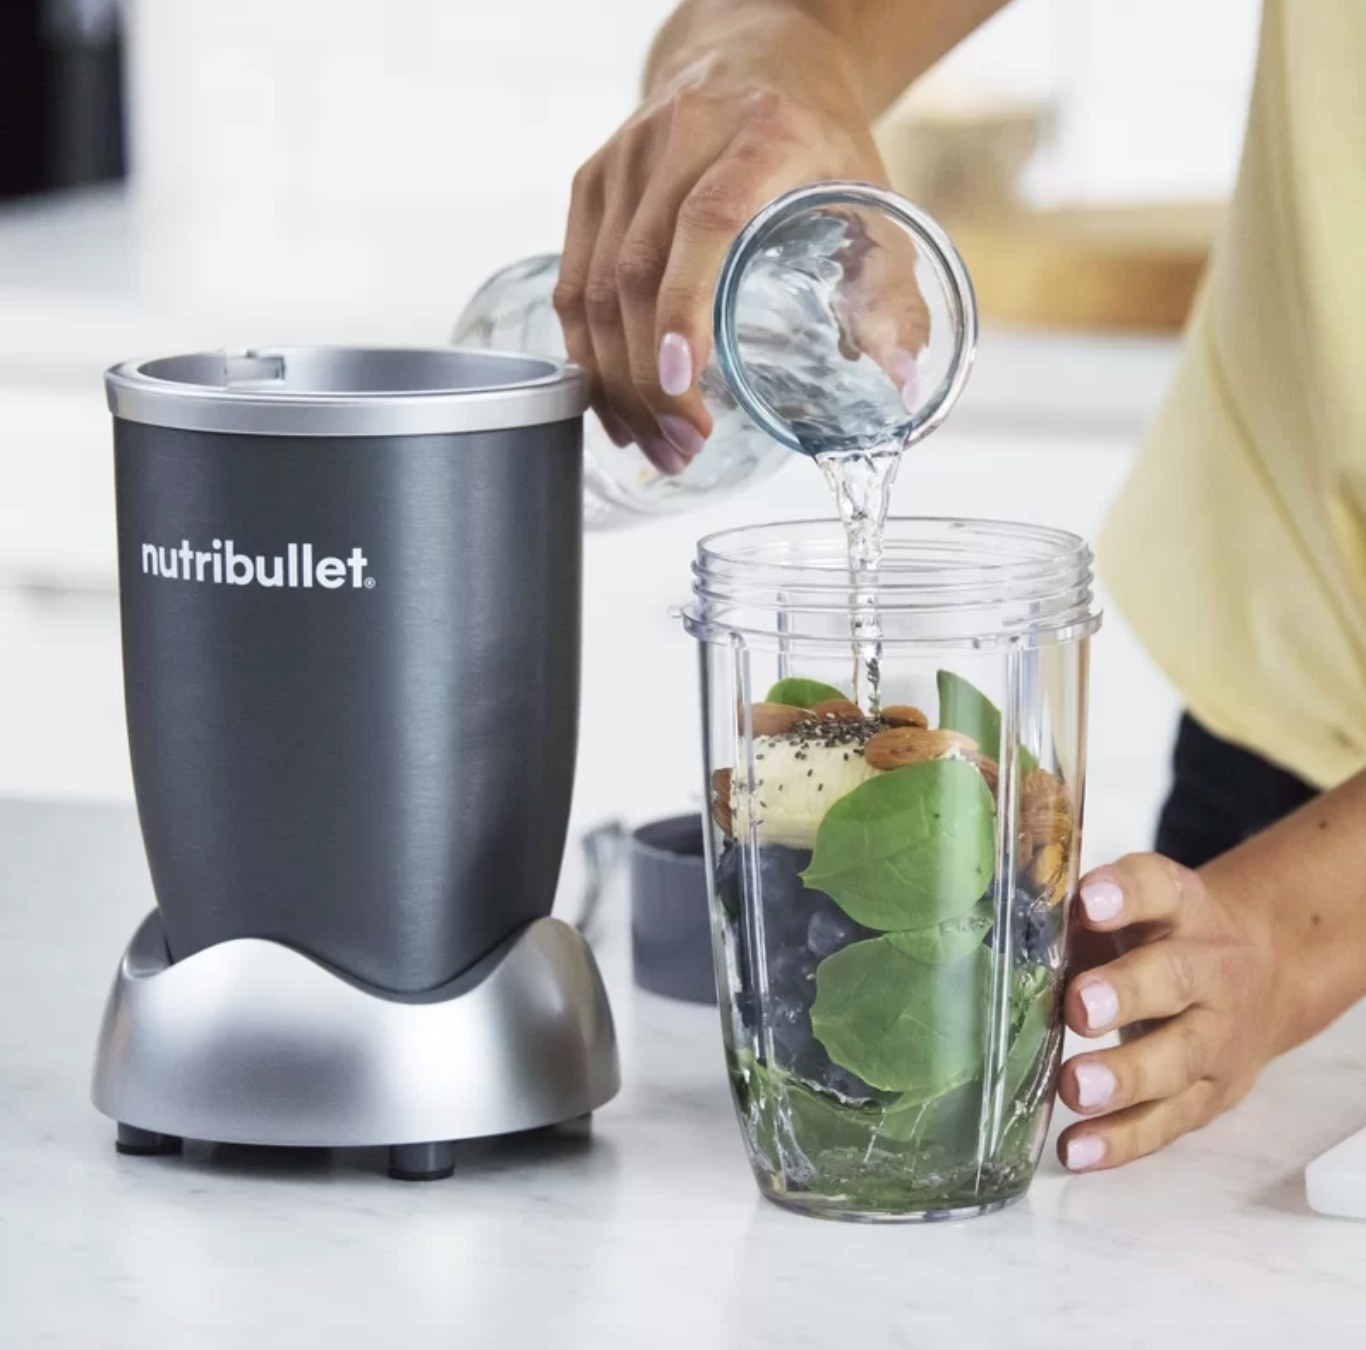 The Nutribullet being used to make a smoothie with greens and blueberries